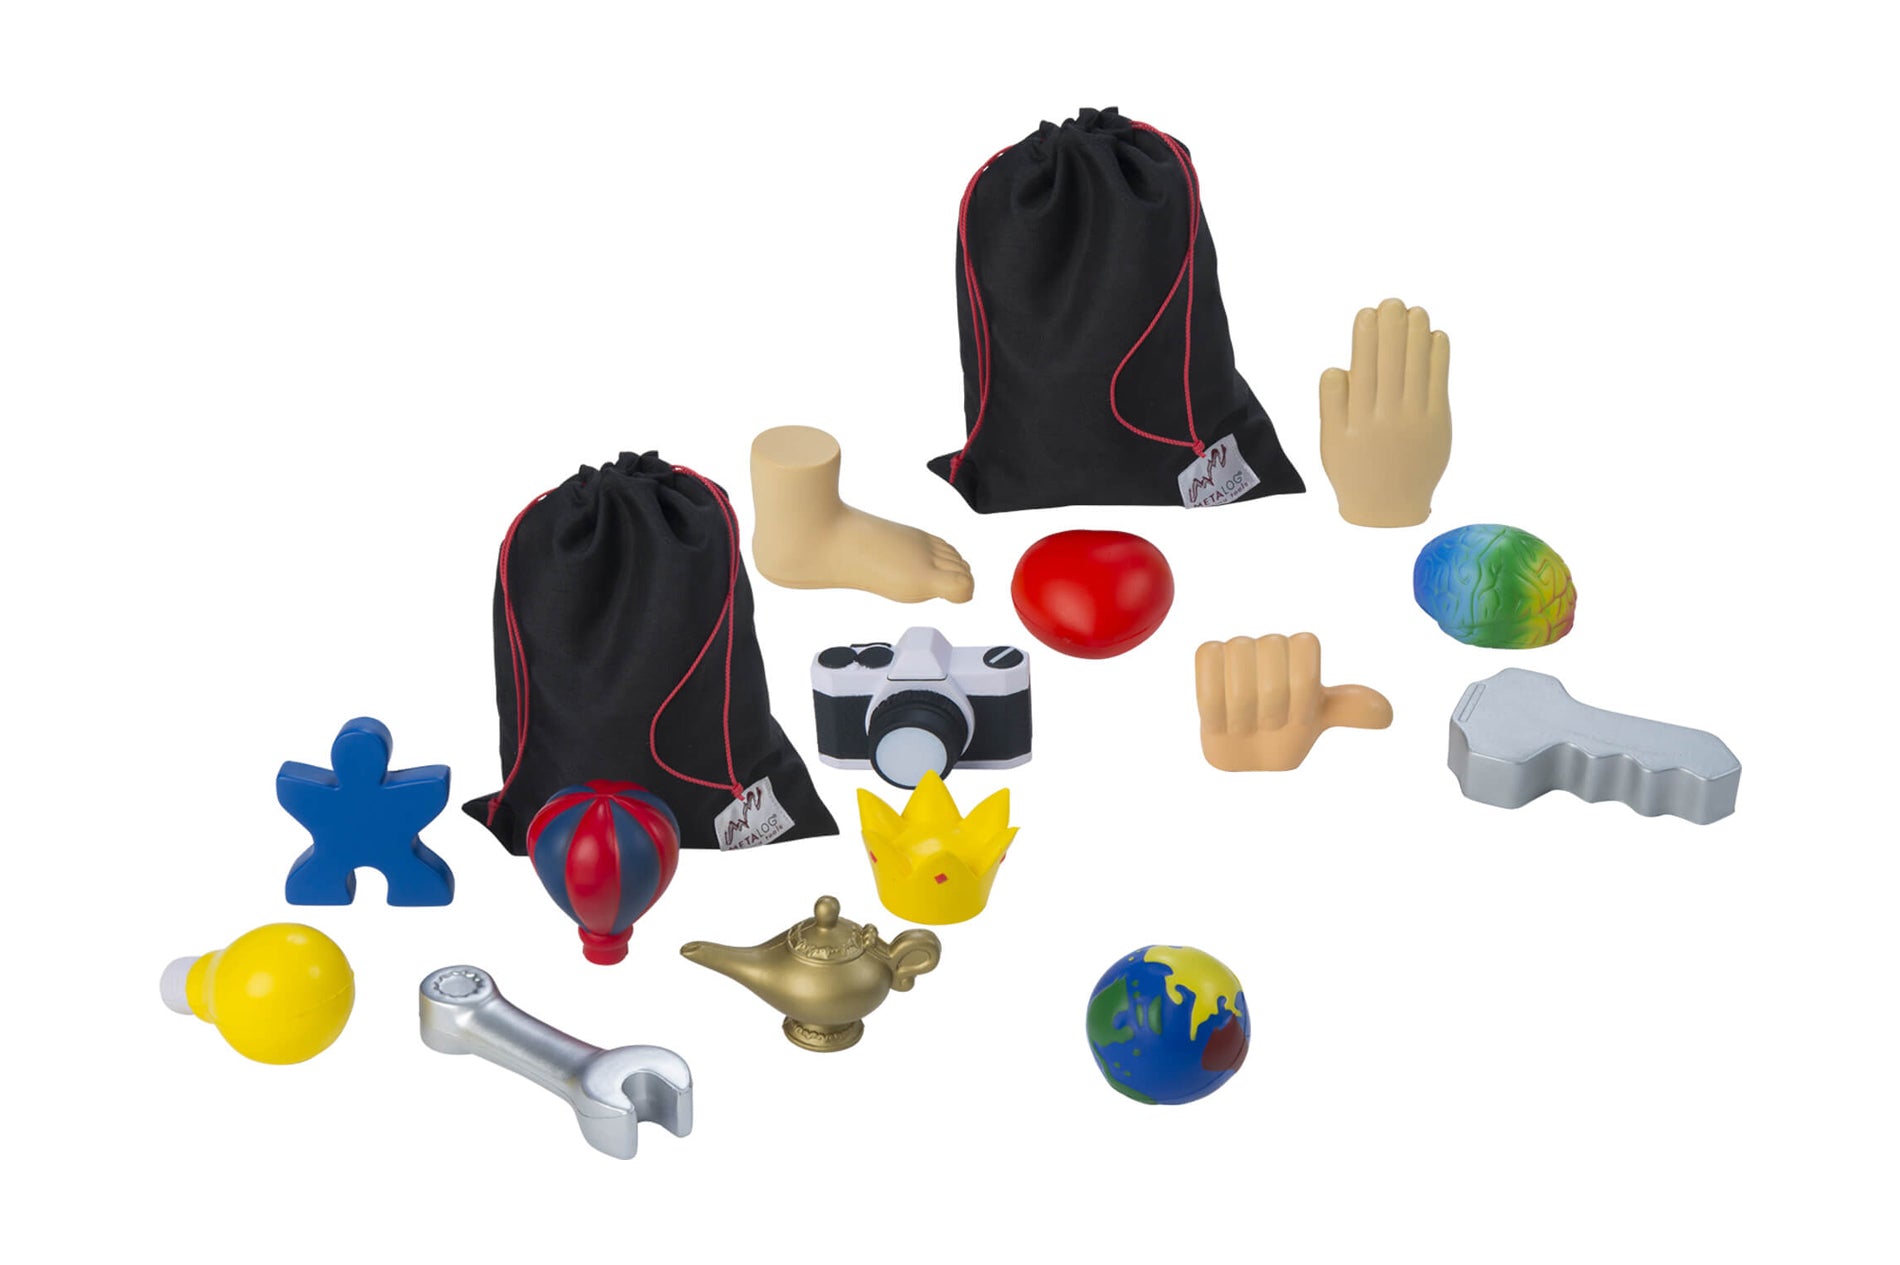 Metalog Facilitation Balls Sets One and Two - 14 soft foam shapes used as top conversation starter 